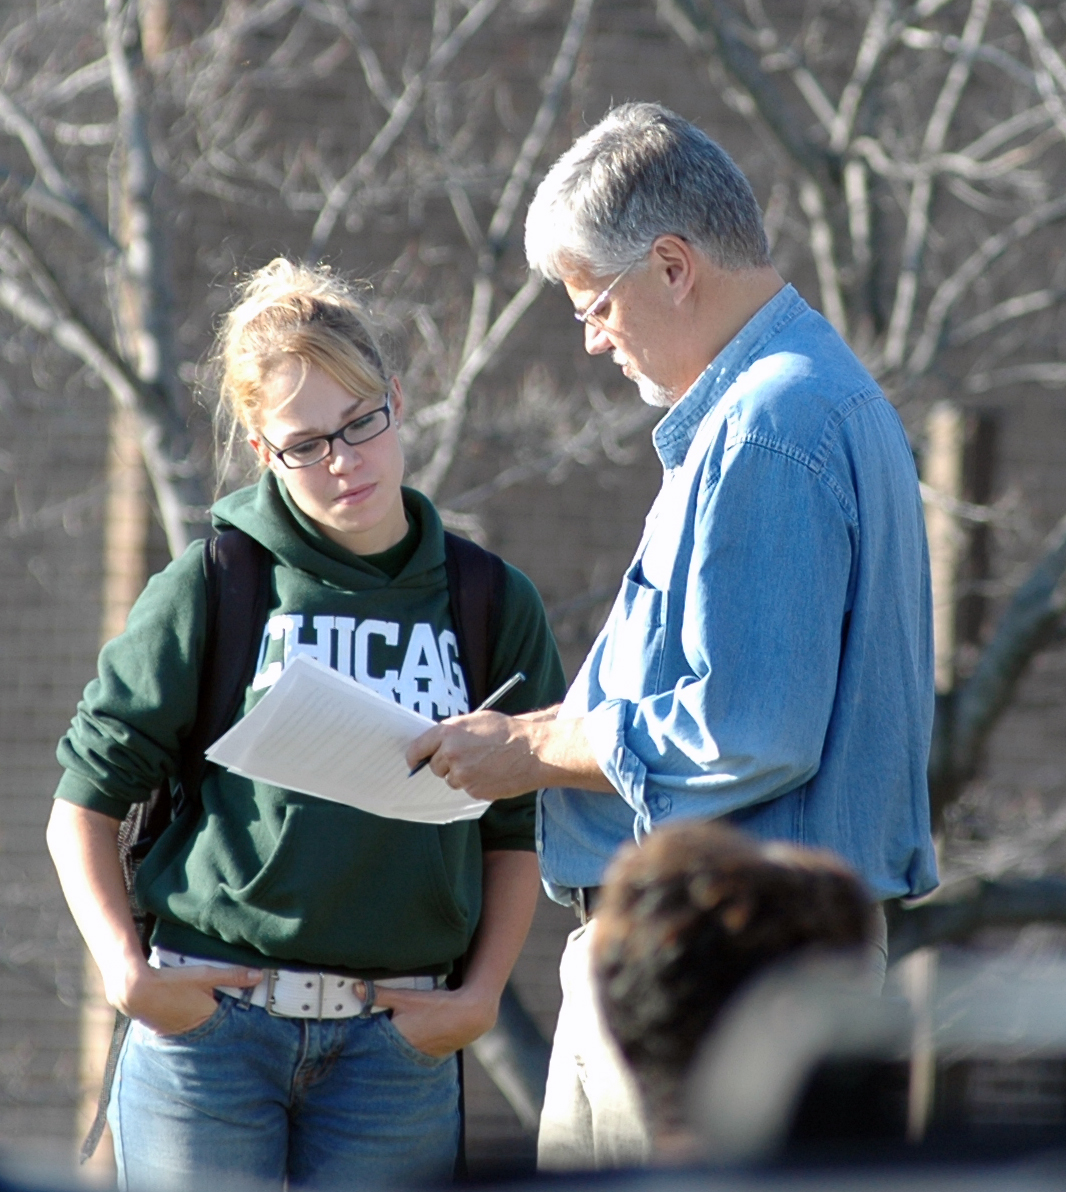 Chicago State instructor working with a student in the quad